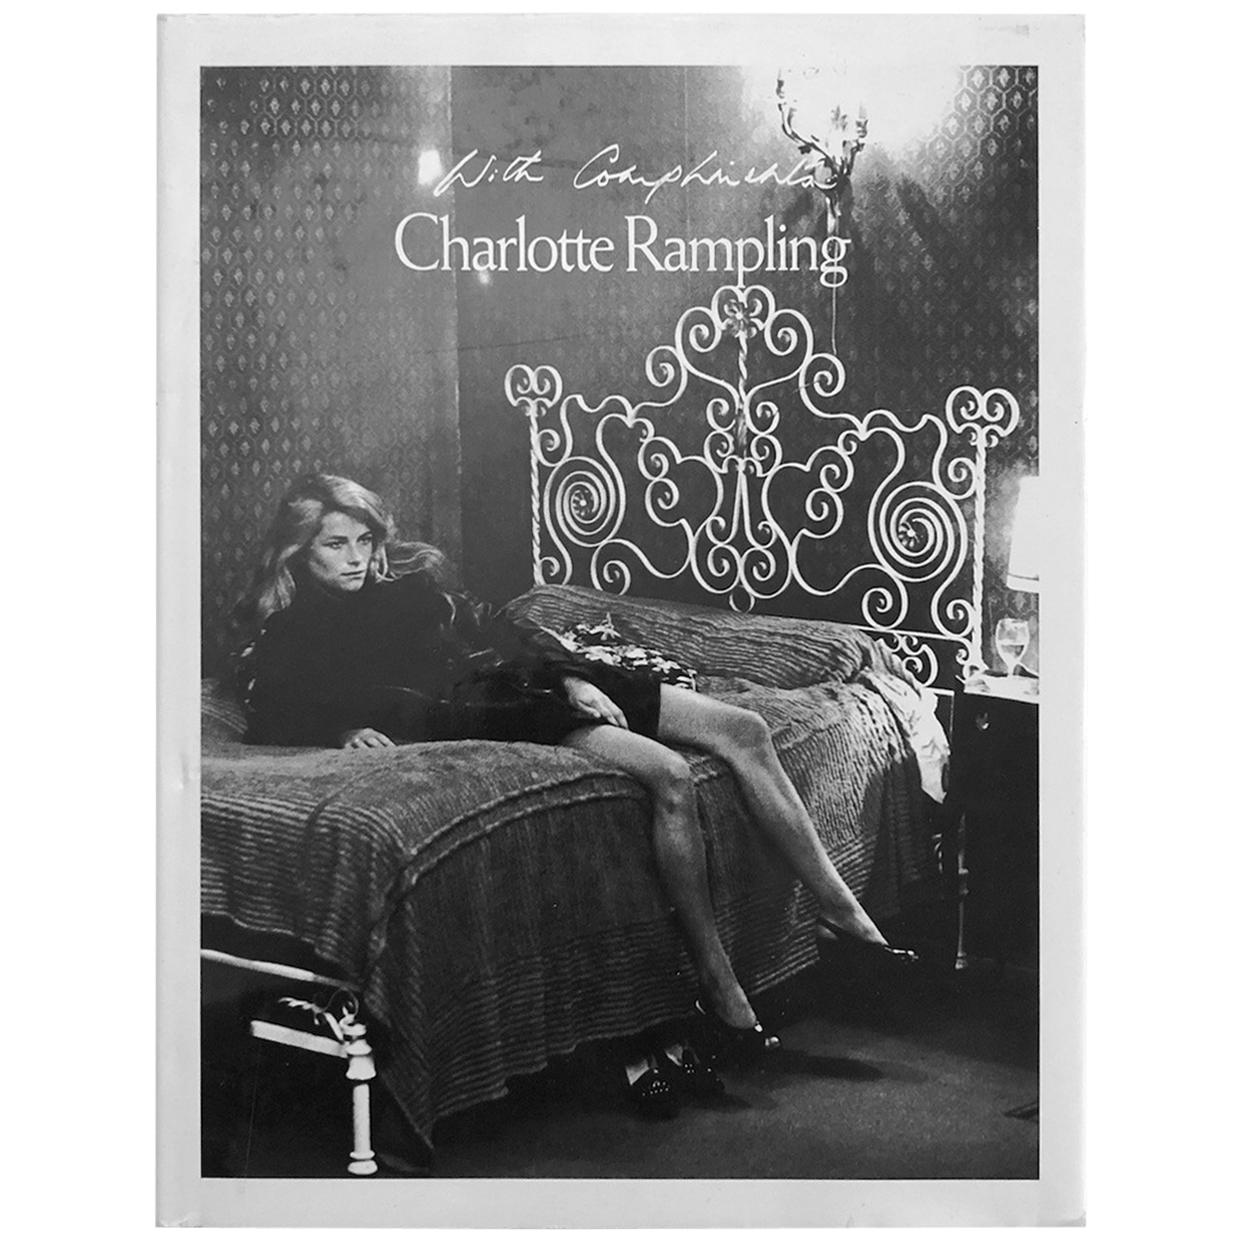 Charlotte Rampling with Compliments Text by Dirk Bogard First Edition, 1987